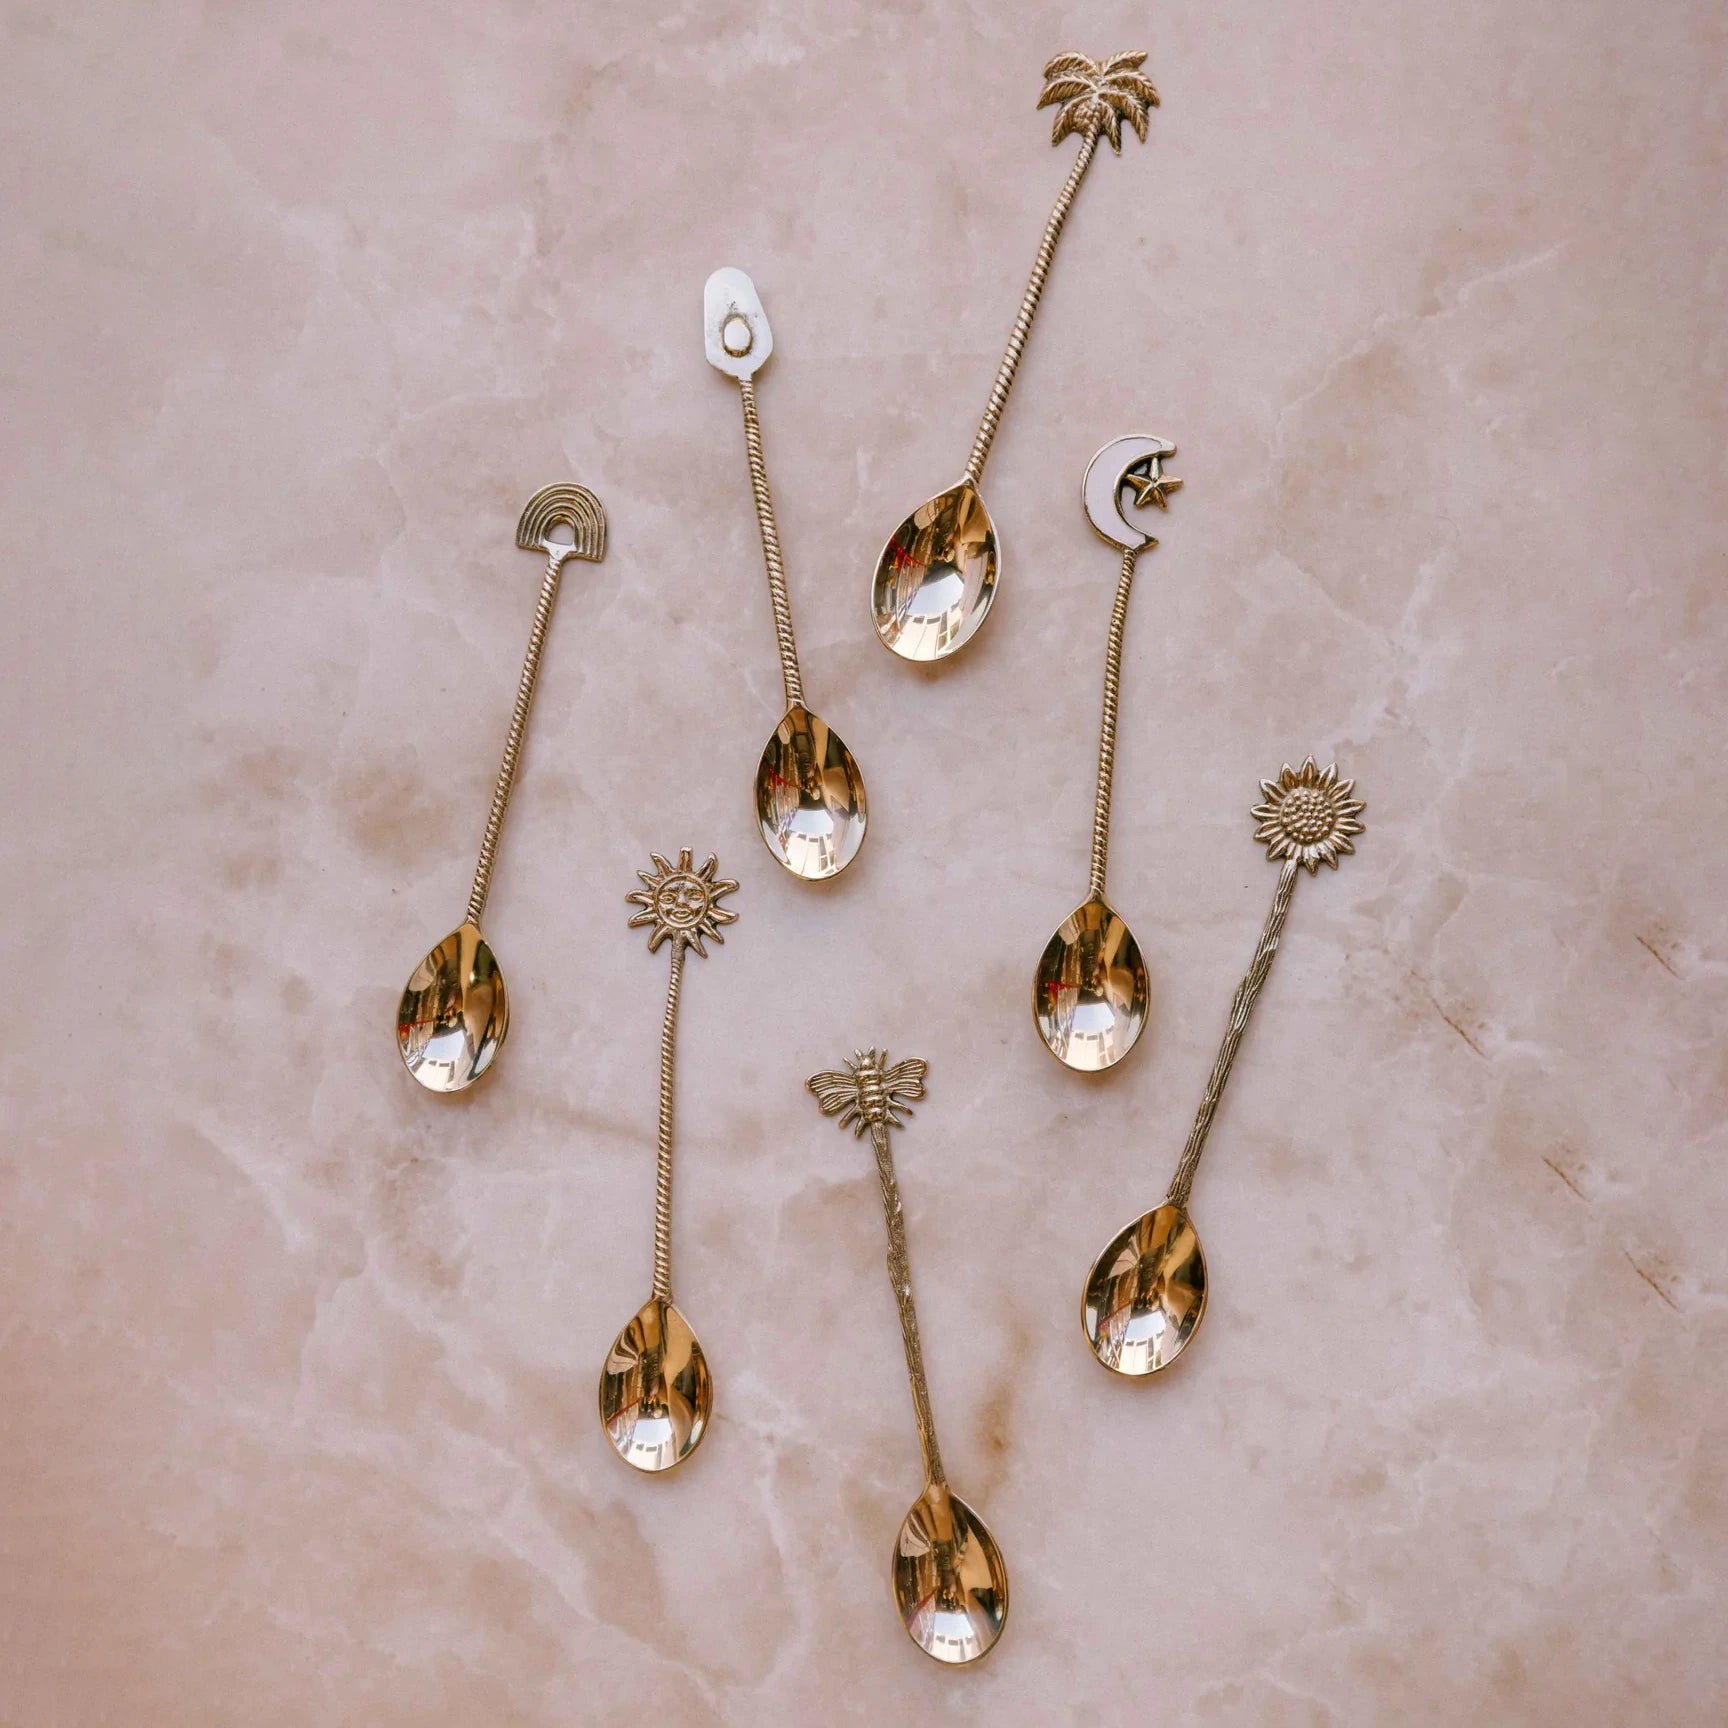 Brass Dessert Spoons by The Wholesome Store